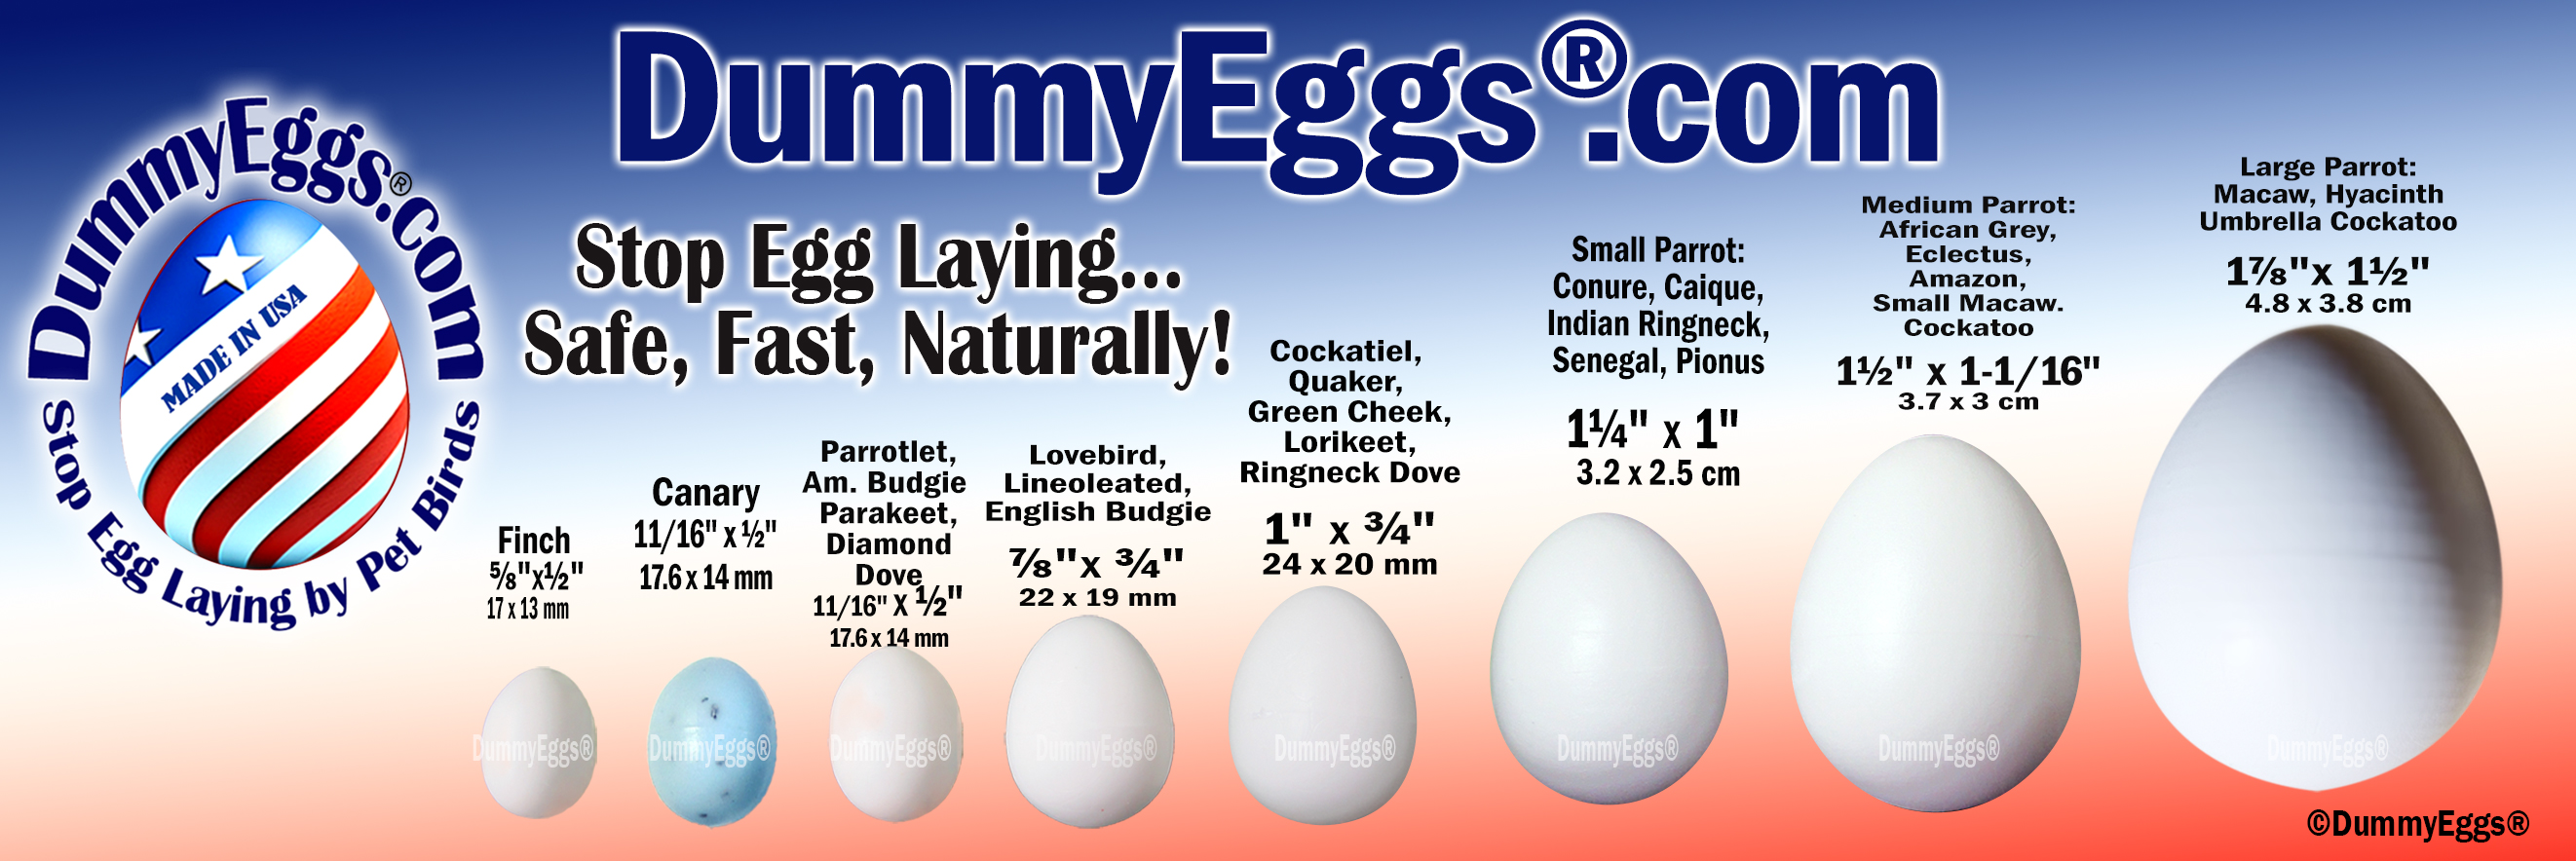 DummyEggs.com heading row of plastic dummy eggs from small to large